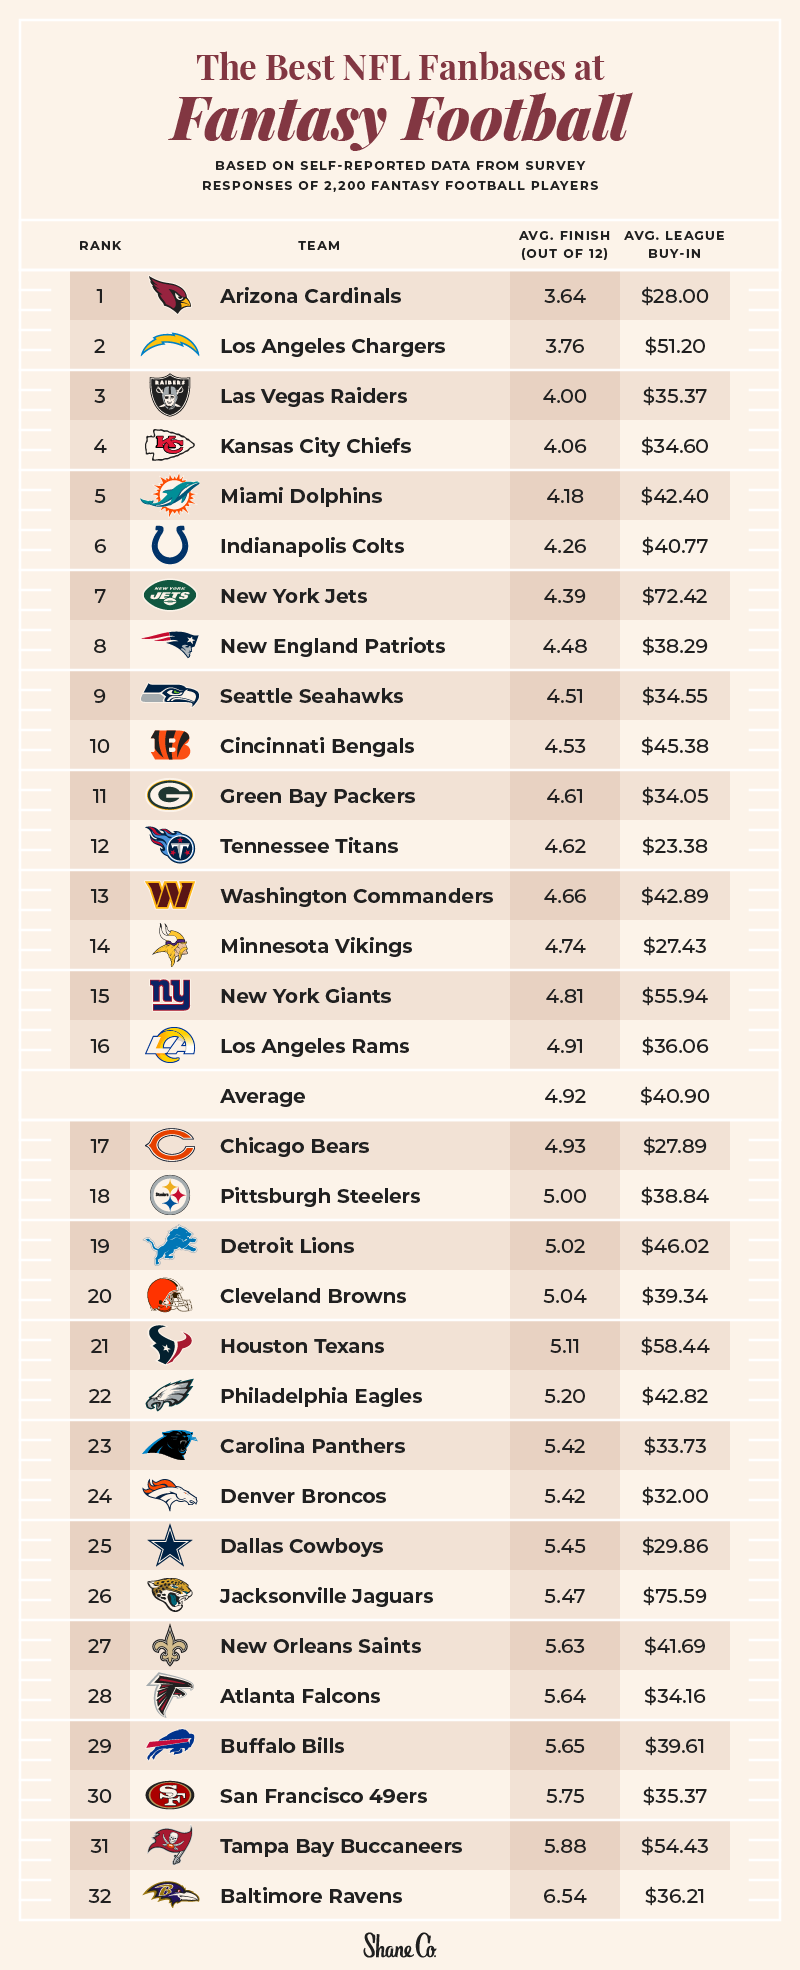 A graphic showing the average league finish of NFL fanbases in fantasy football leagues